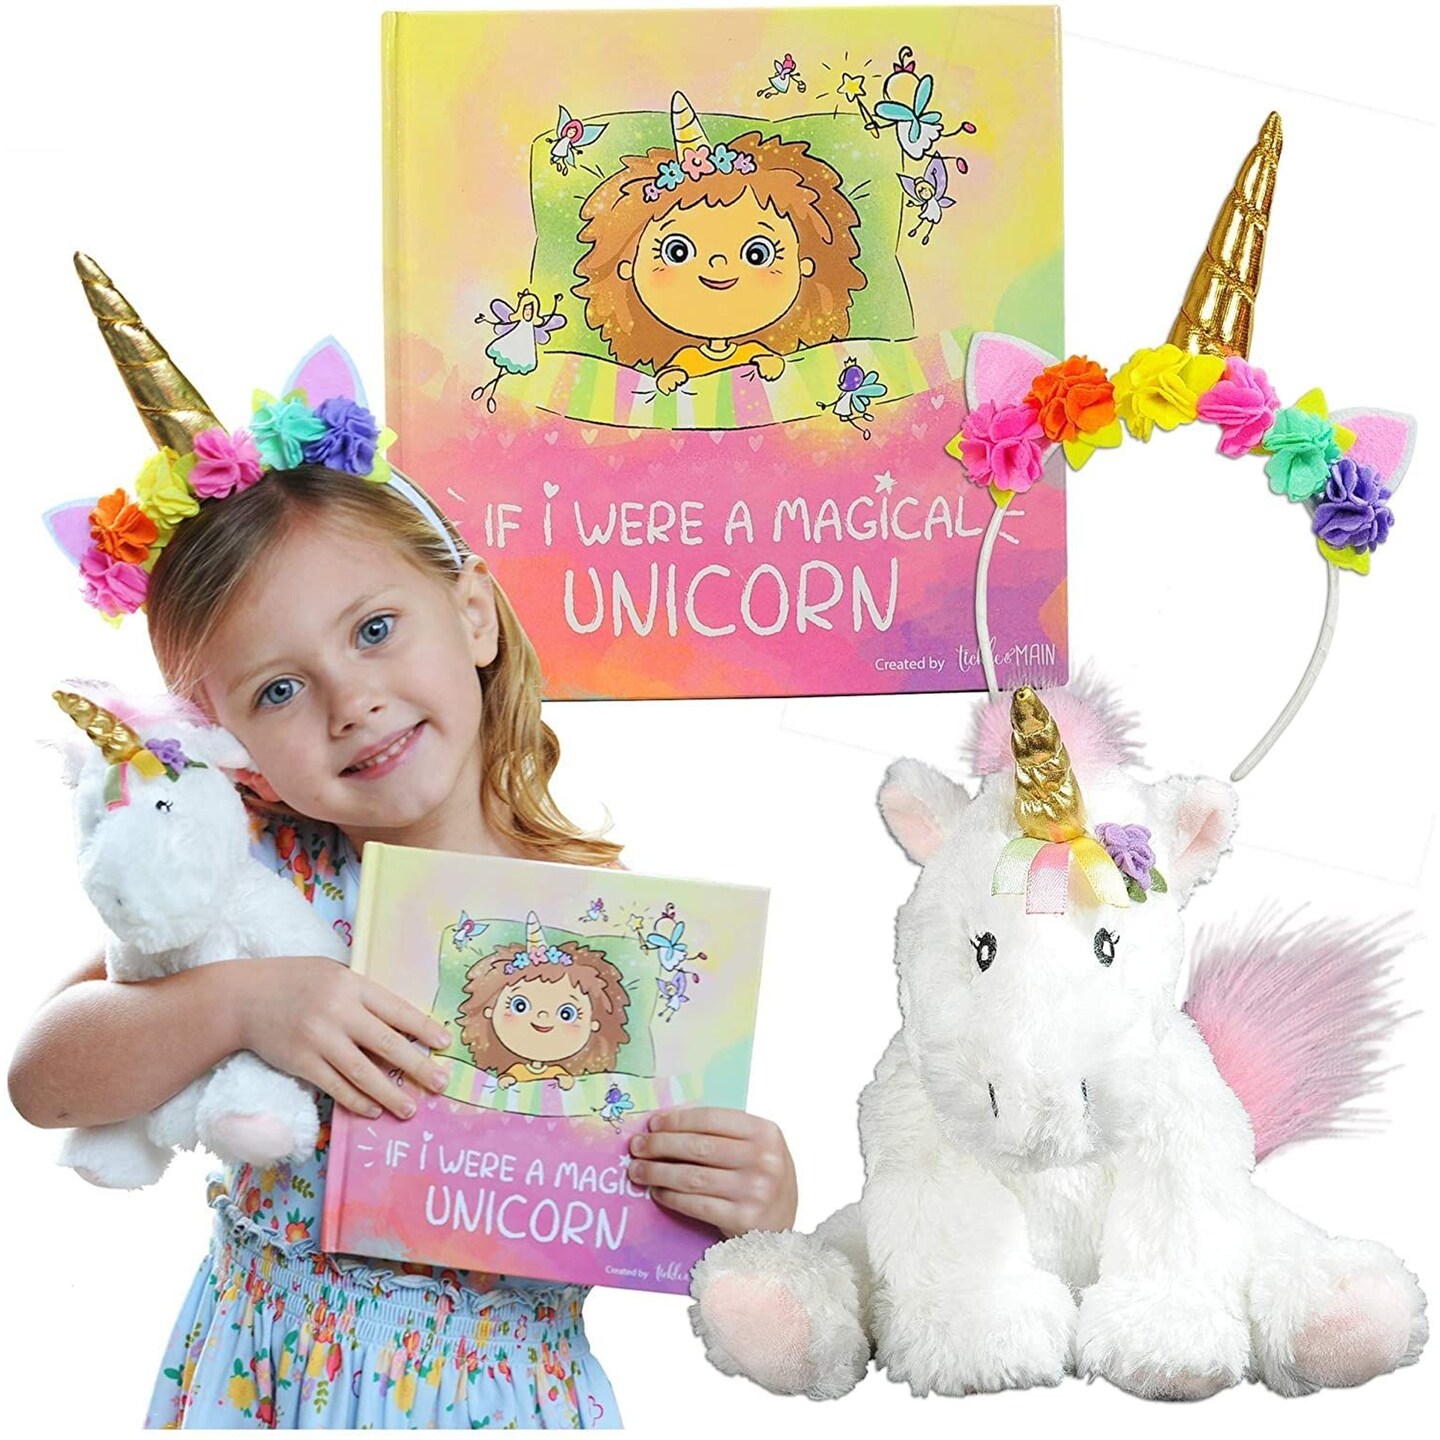 Tickle &#x26; Main Magical Unicorn Gift Set, 3-Piece Set with Colorful Headband, Illustrated Storybook and a Unicorn Stuffed Animal for Girls 3 Years Old and Above, Fun Birthday Gift for Creative Kids